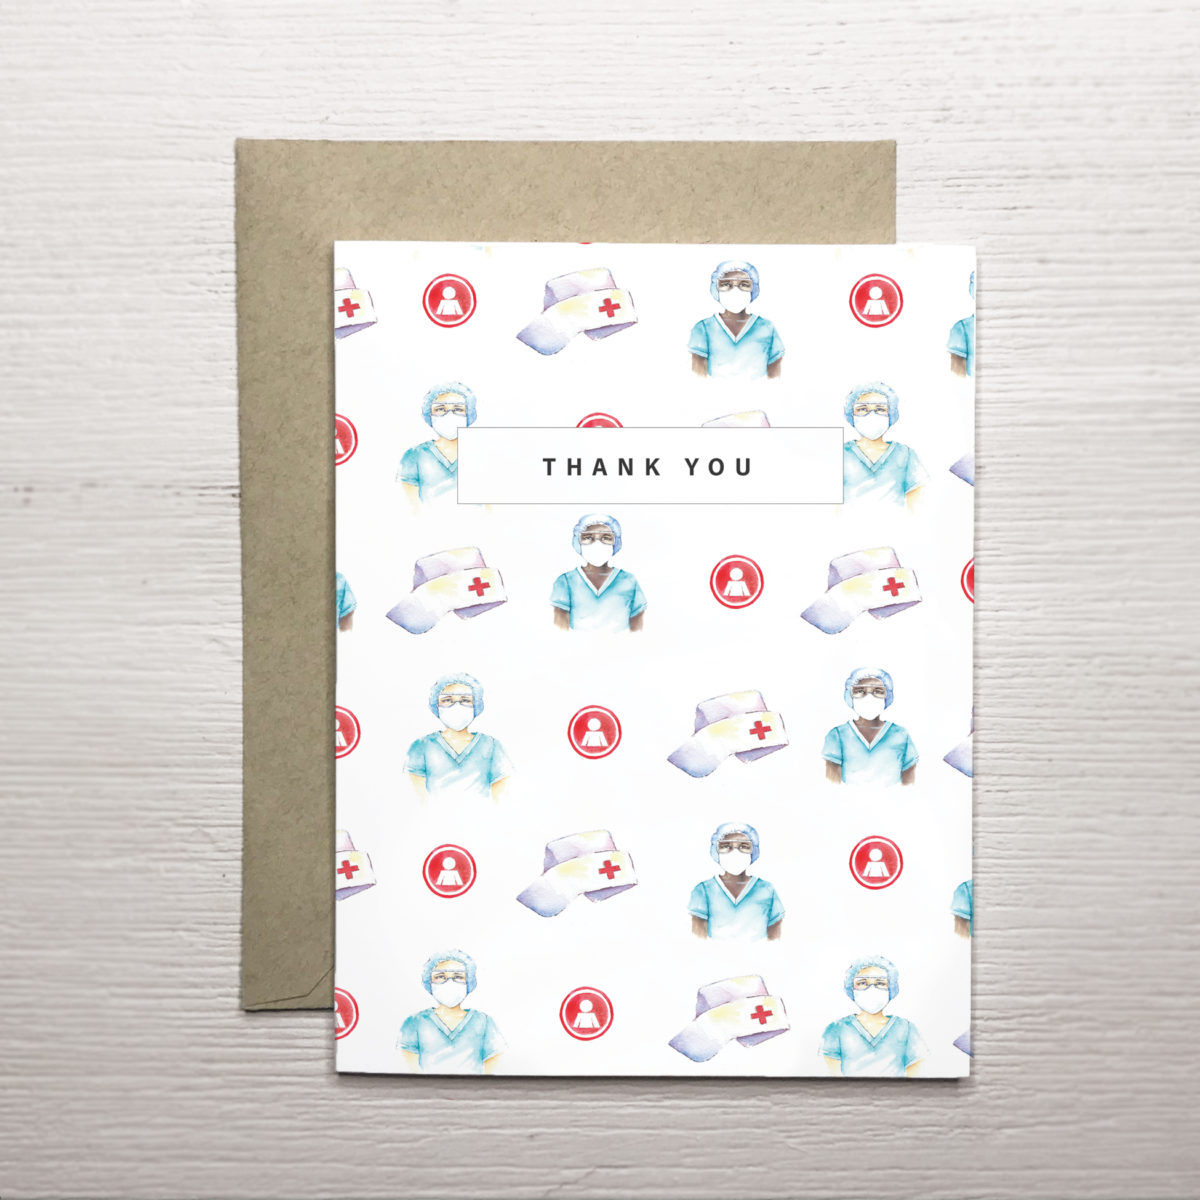 A2 greeting card with nurse pattern and thank you